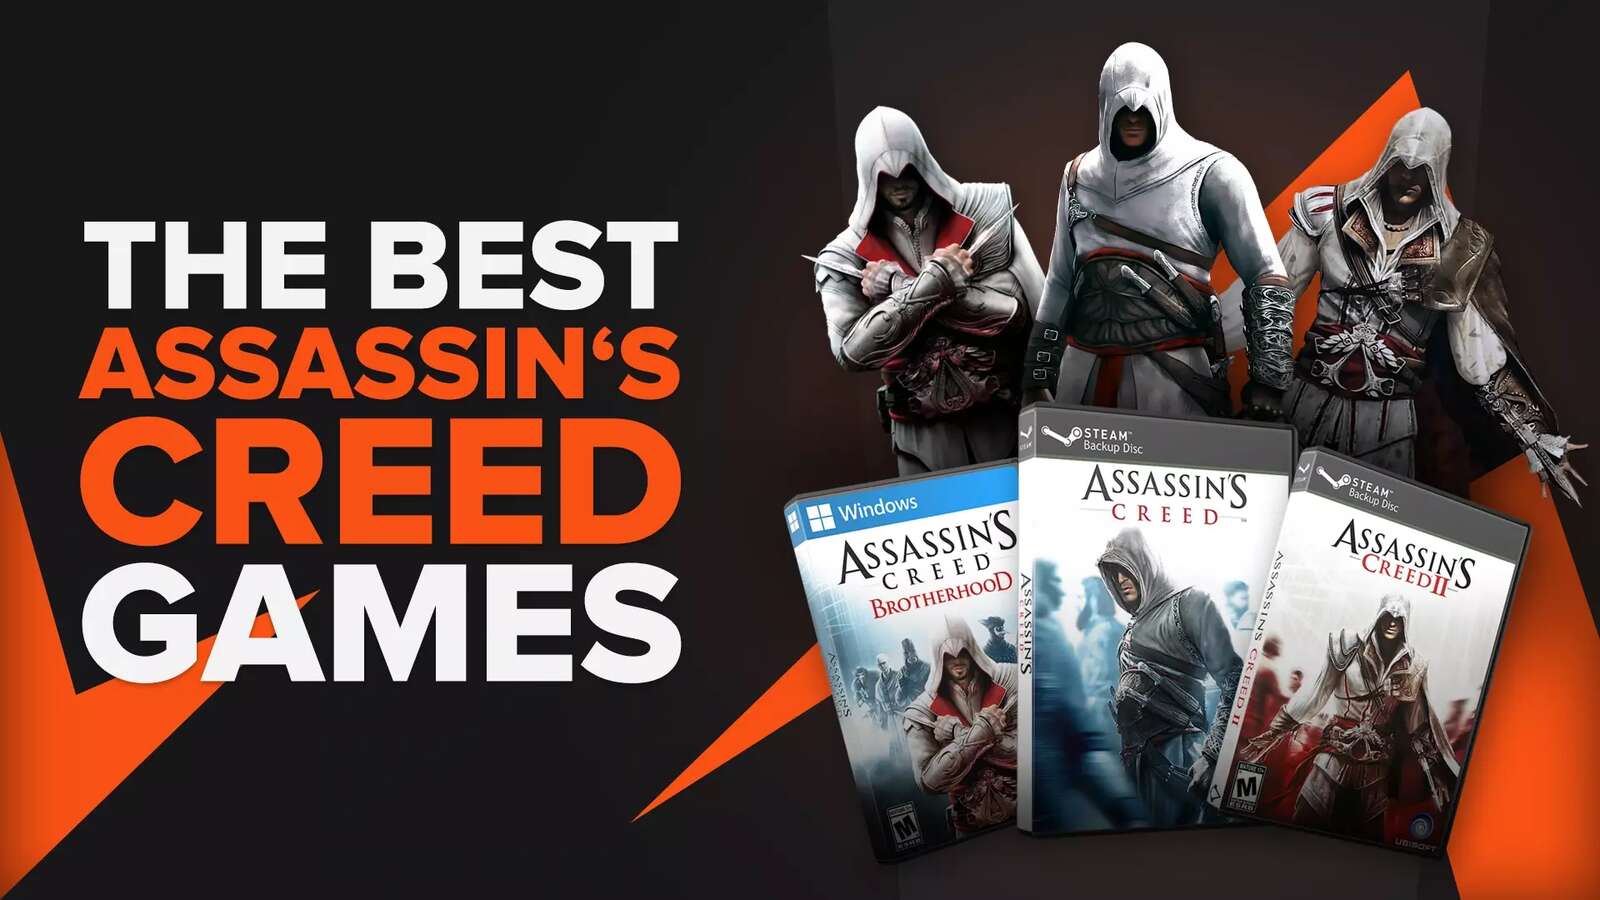 The 10 Best Assbuttin's Creed Games [Ranked]